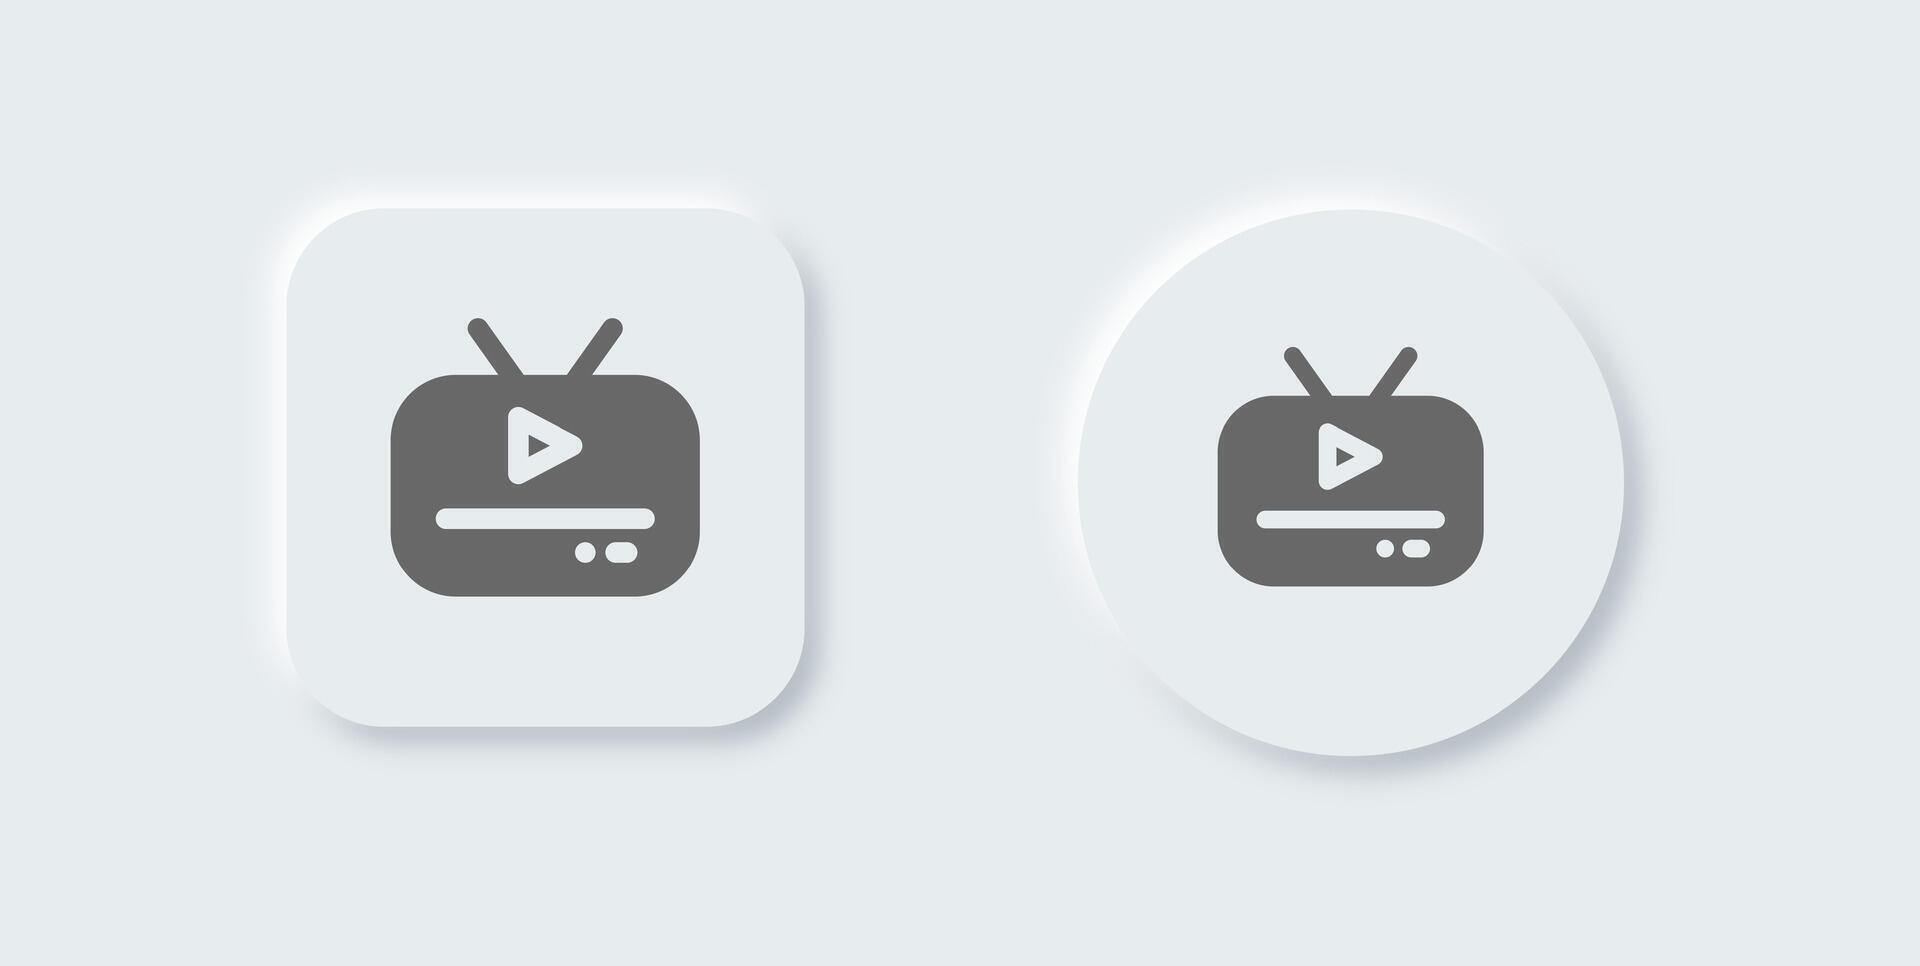 Tv solid icon in neomorphic design style. Television signs vector illustration.